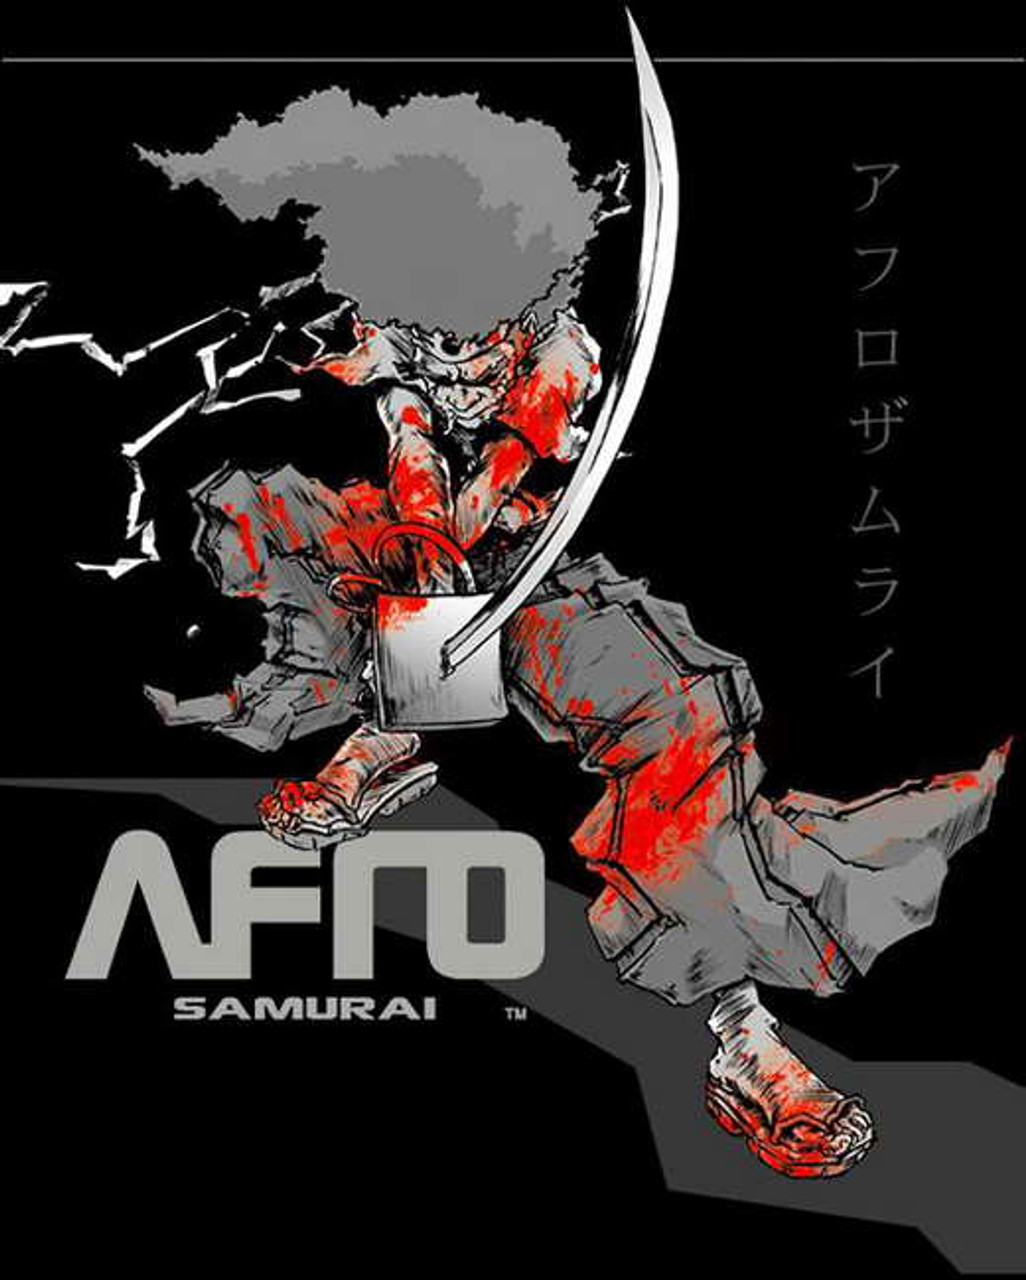 Amazon.com: TOYOCC African Samurai Anime Poster Japanese Cartoon Poster (2)  Canvas Poster Bedroom Decor Office Room Decor Gift Frame-style  30x20inch(75x50cm): Posters & Prints